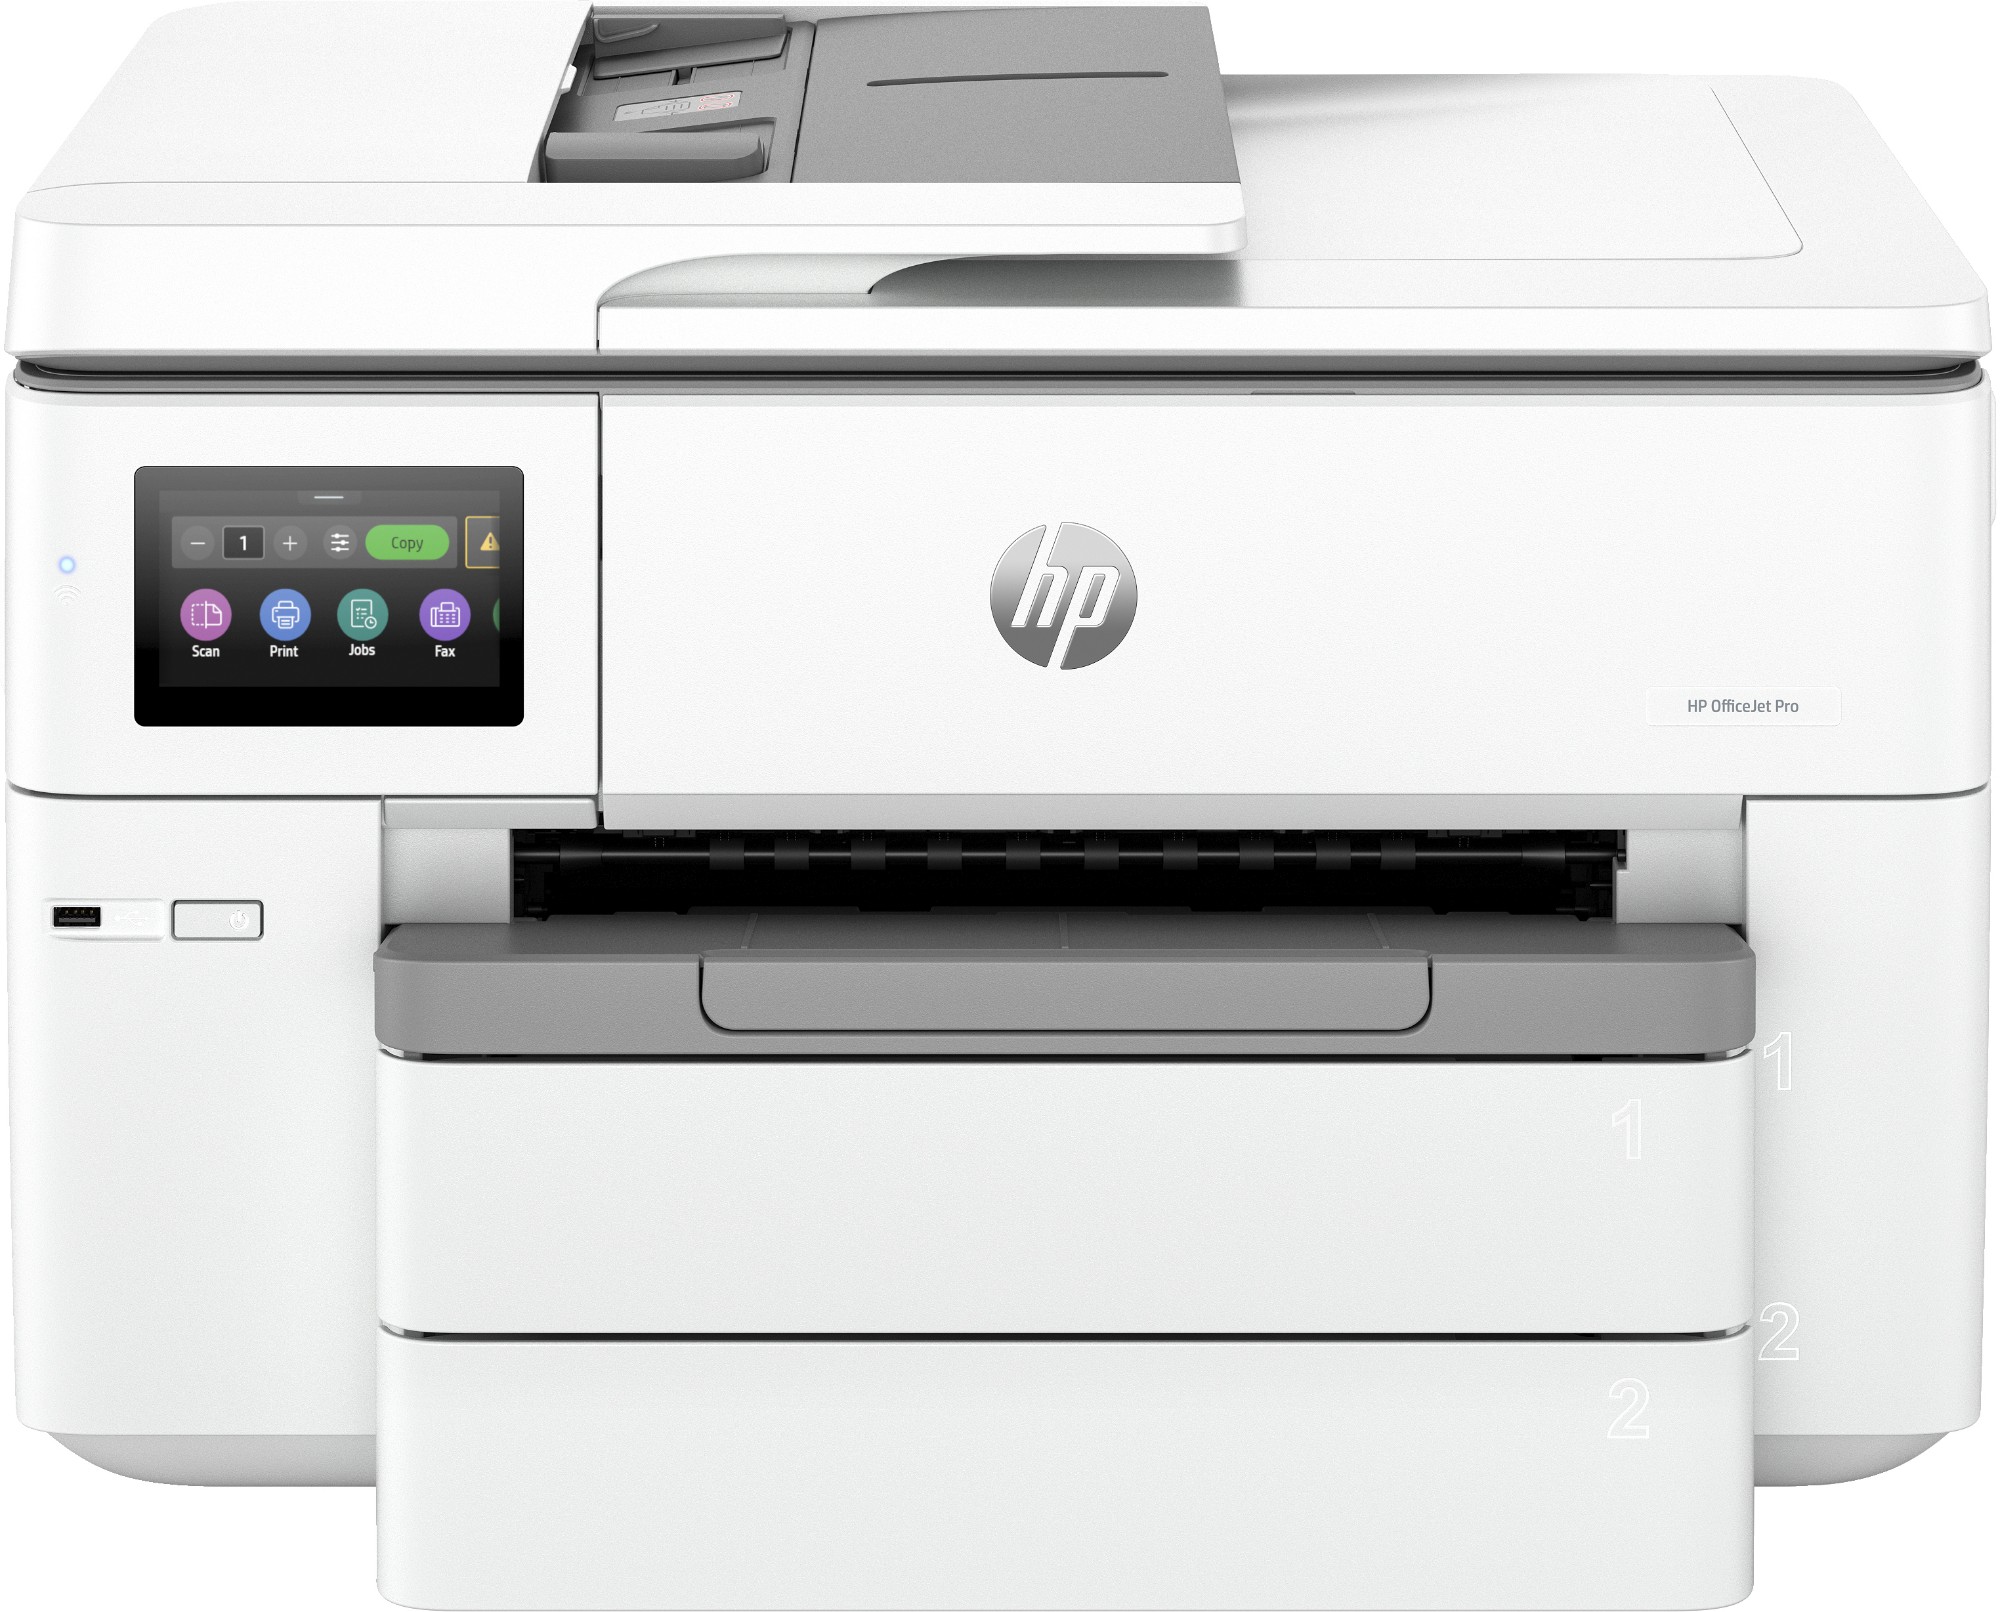 HP OfficeJet Pro HP 9730e Wide Format All-in-One Printer, Colour, Printer for Small office, Print, copy, scan, HP+; HP Instant Ink eligible; Wireless; Two-sided printing; Print from phone or tablet; Automatic document feeder; Front USB flash drive port; S